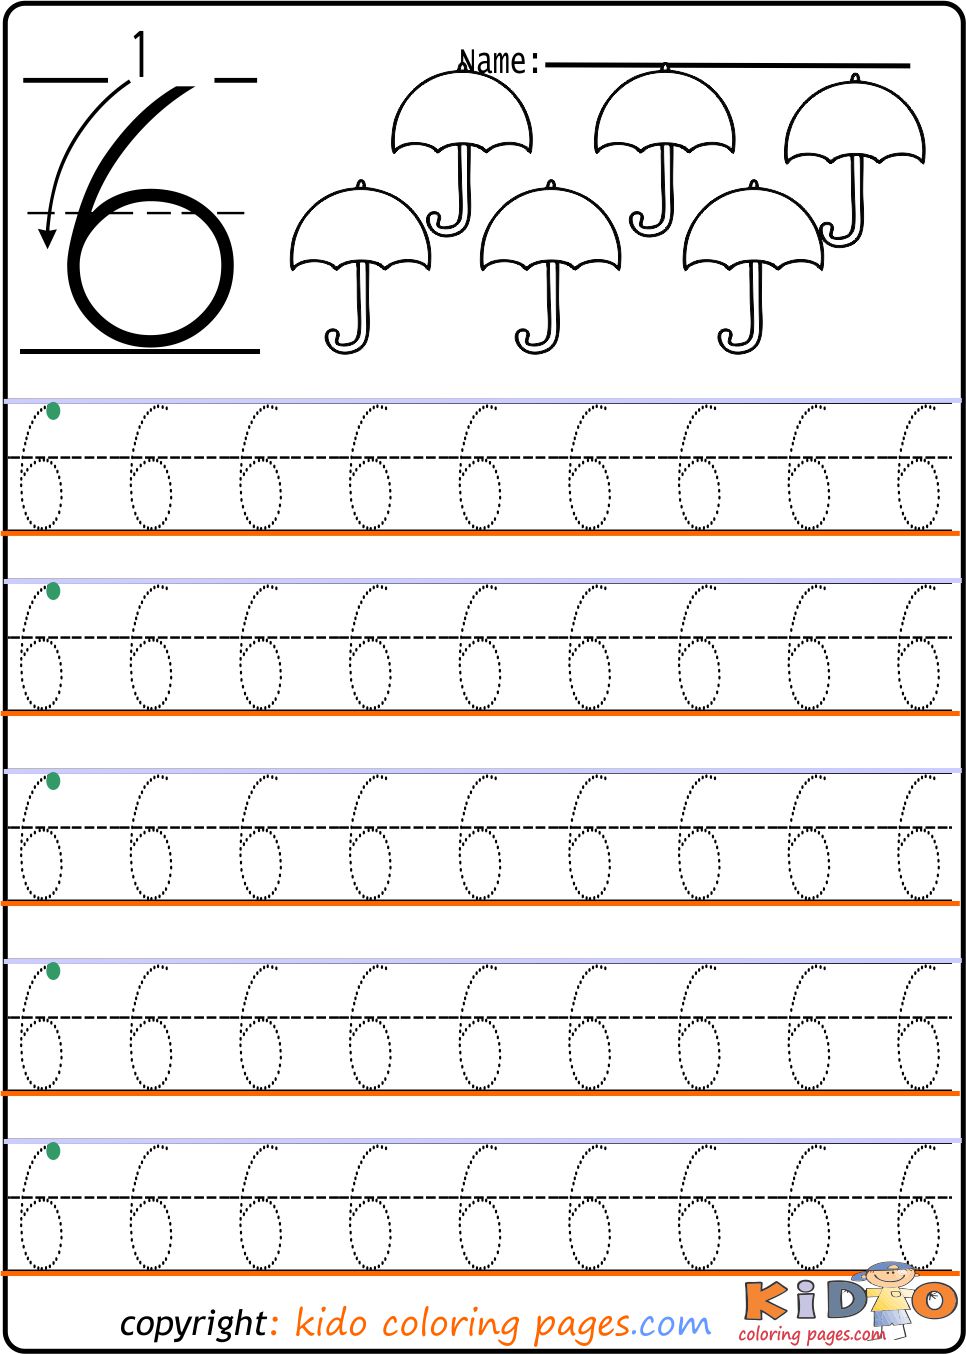 trace-number-5-worksheet-for-free-for-kids-count-and-trace-5-number